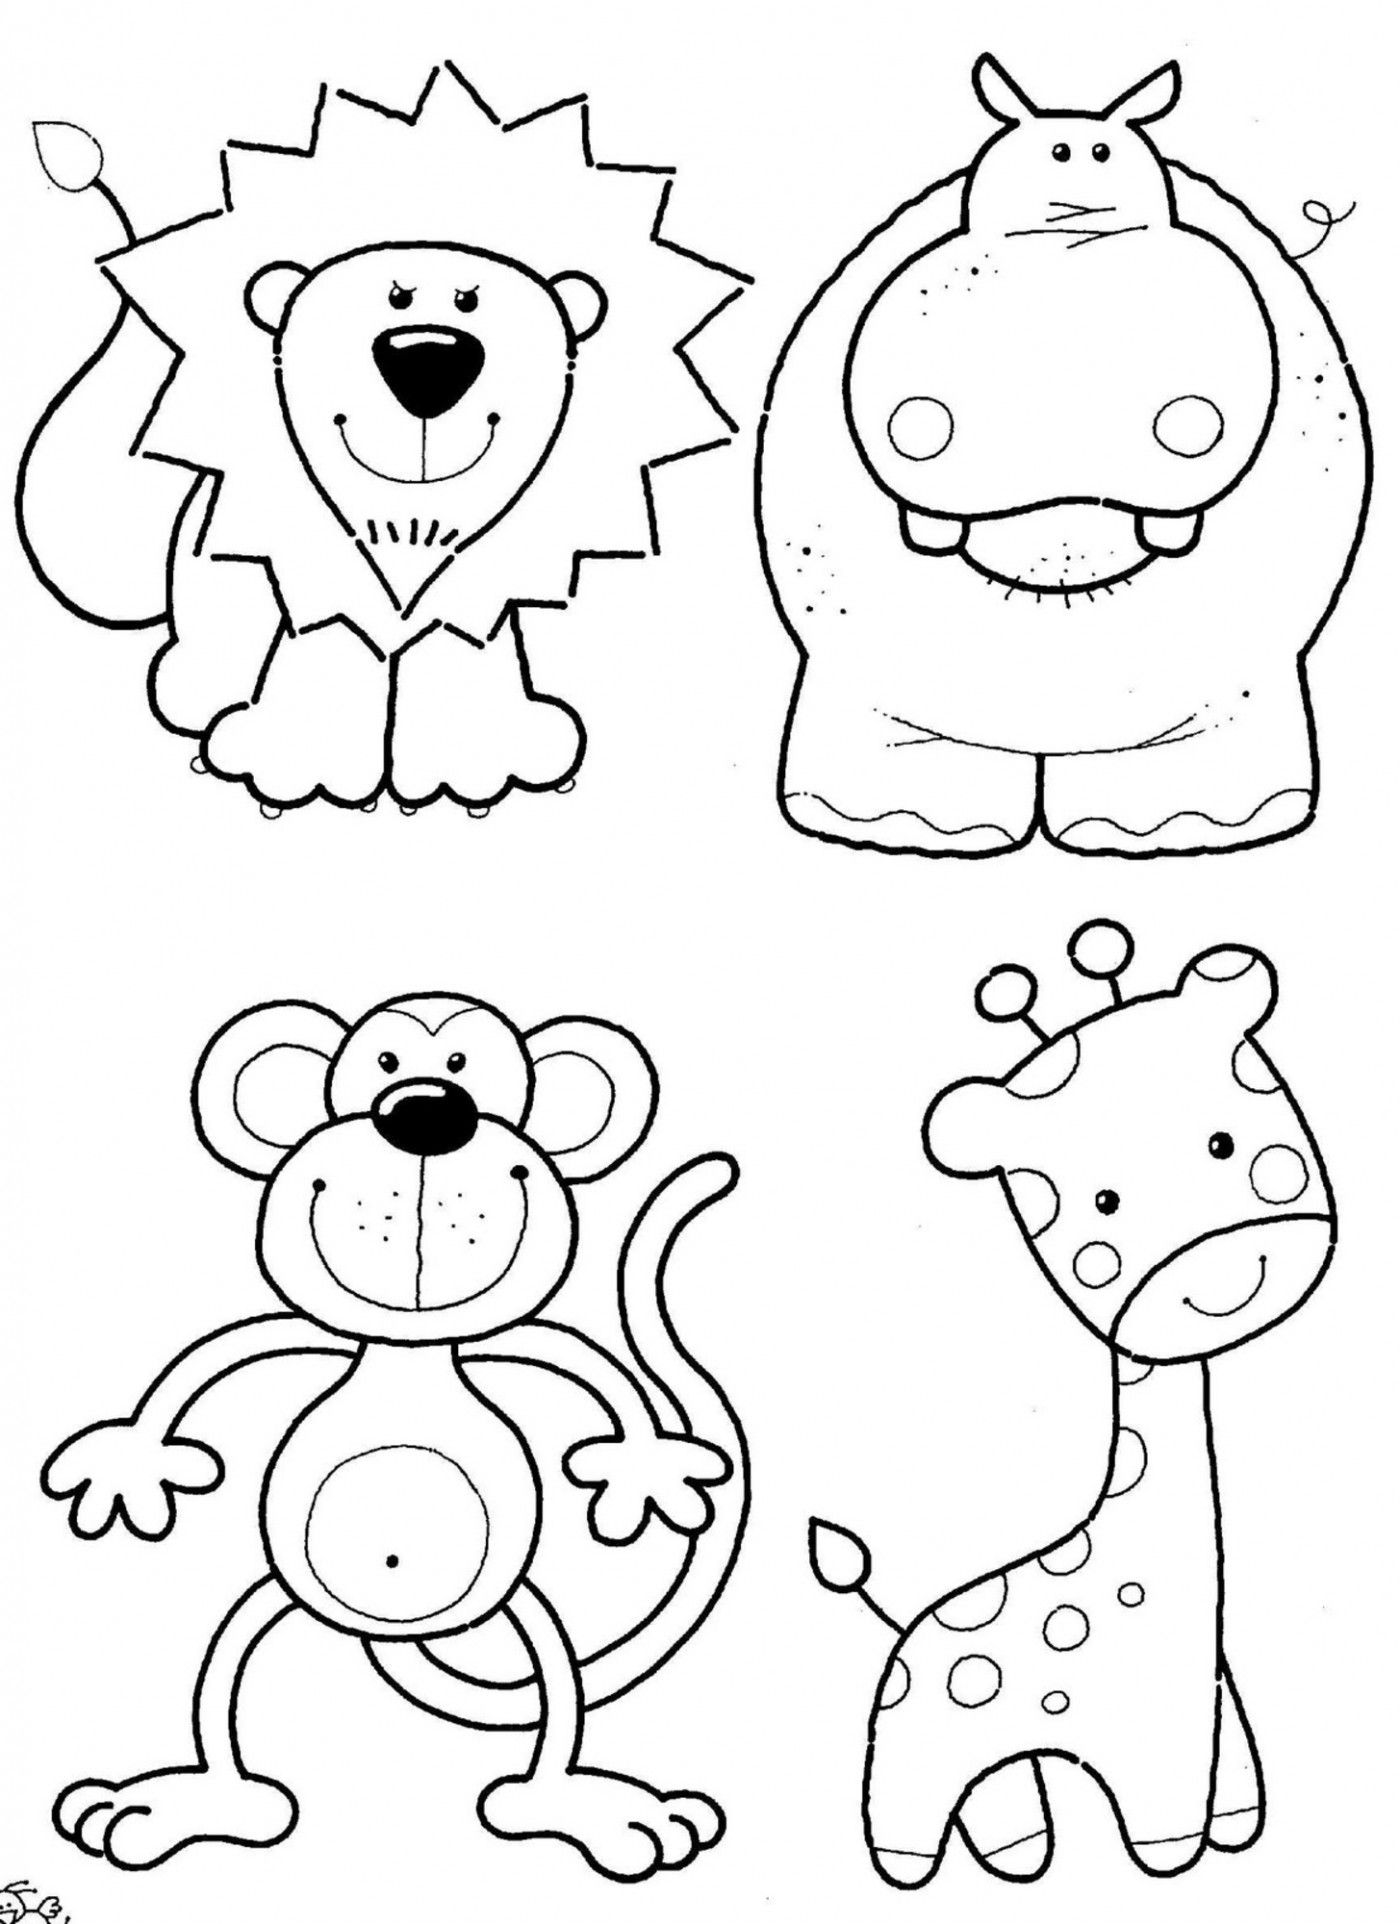 Animal Coloring Pages For Toddlers - Coloring Home